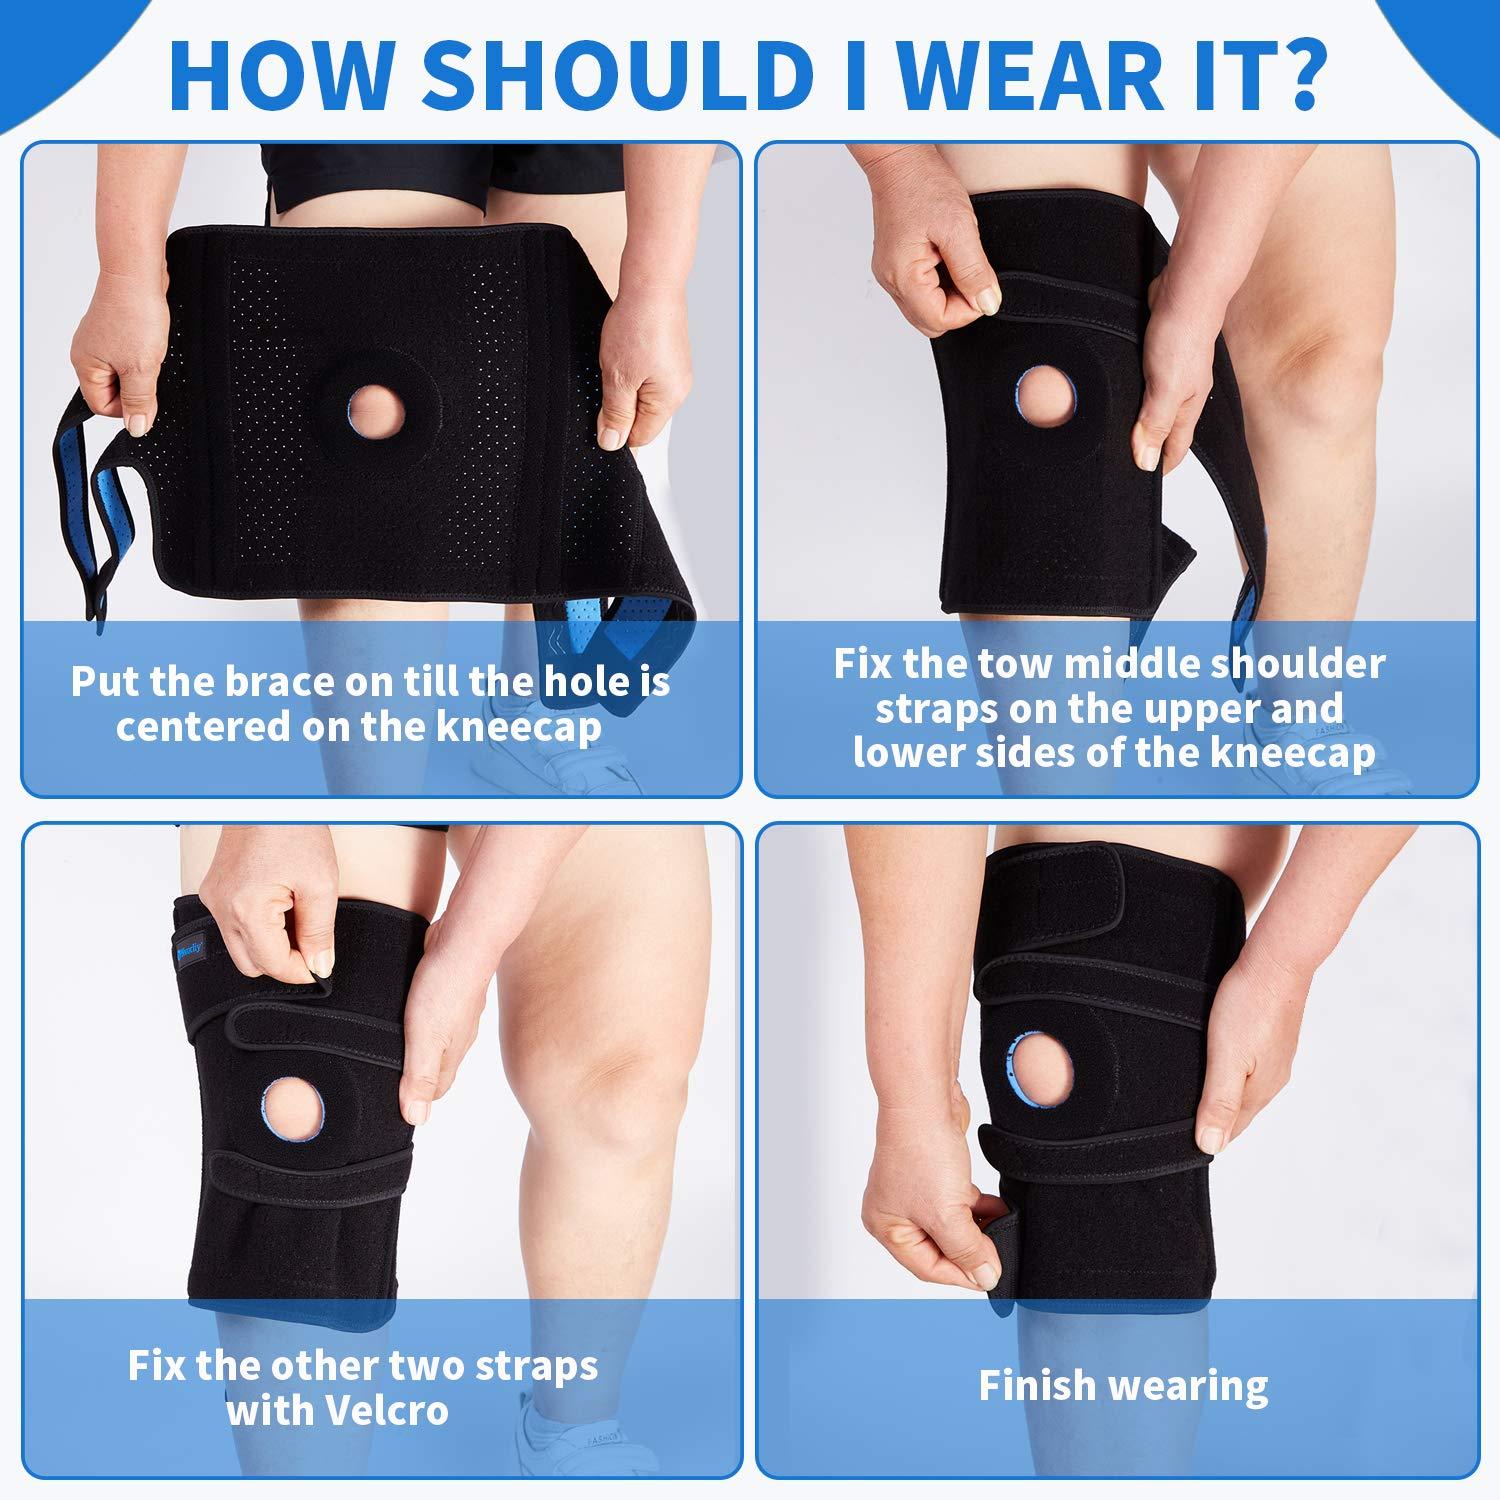 Nvorliy Plus Size Adjustable Knee Brace - Lengthened and Widened Design,  Extra Large Open Patella Knee Support for Running, Sports, Arthritis, ACL,  LCL, MCL, Pain Relief, Fit Women & Men (3XL/4XL, Black)